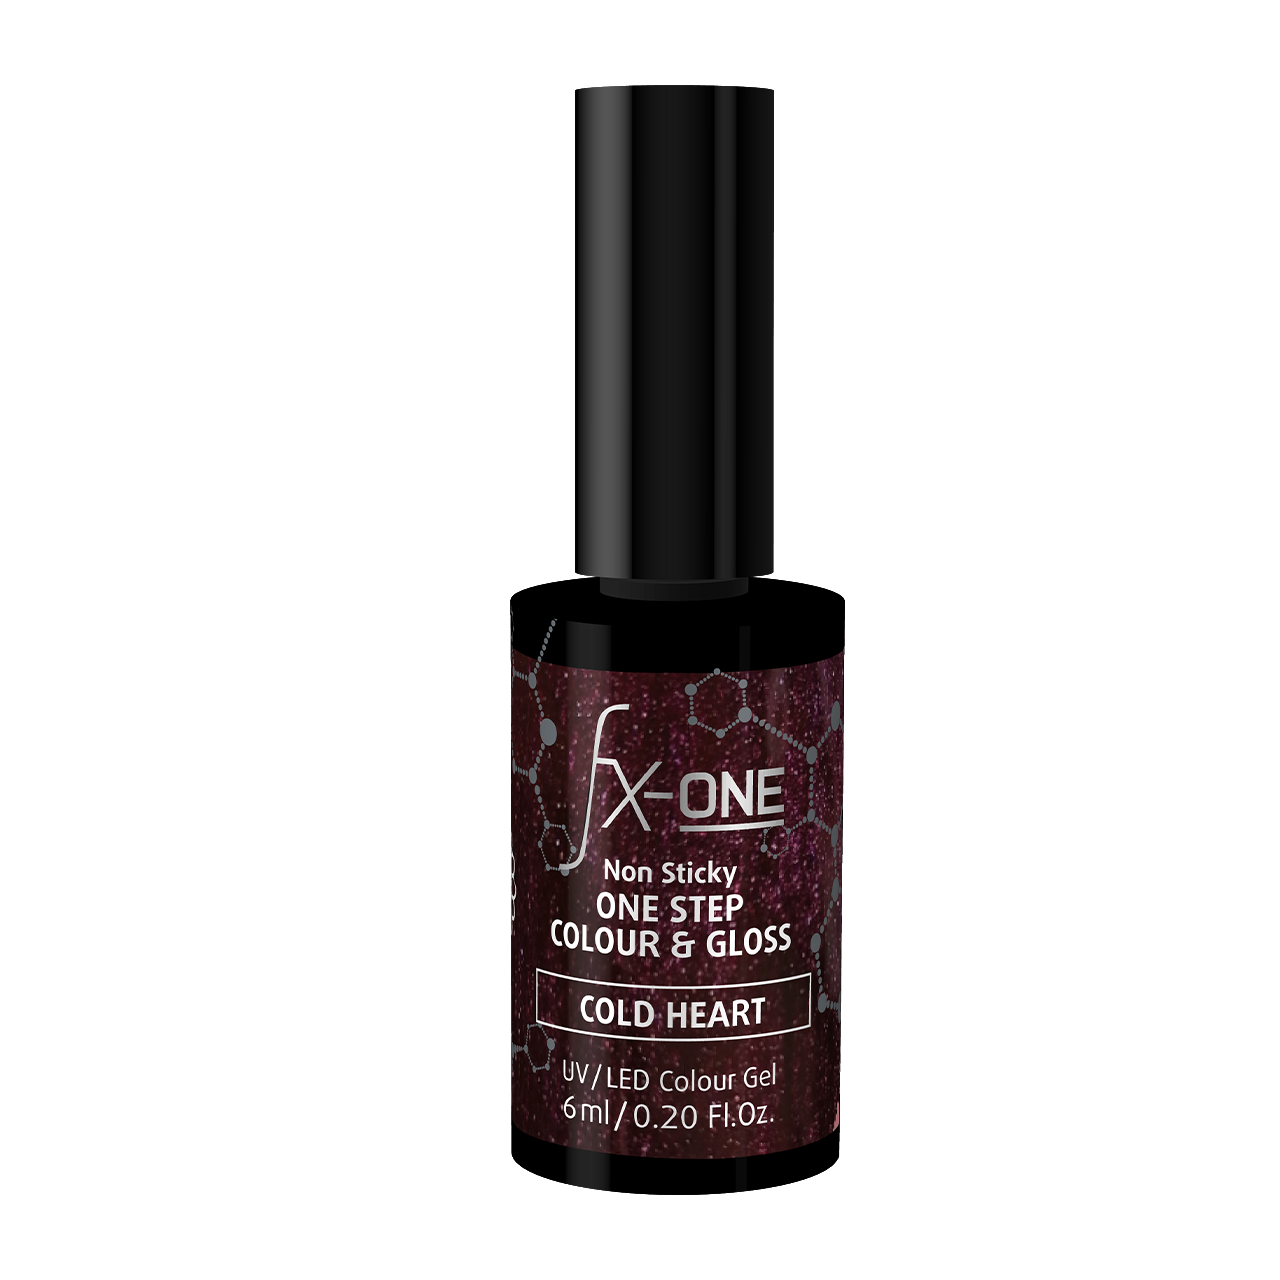 FX ONE Colour & Gloss Cold Heart!